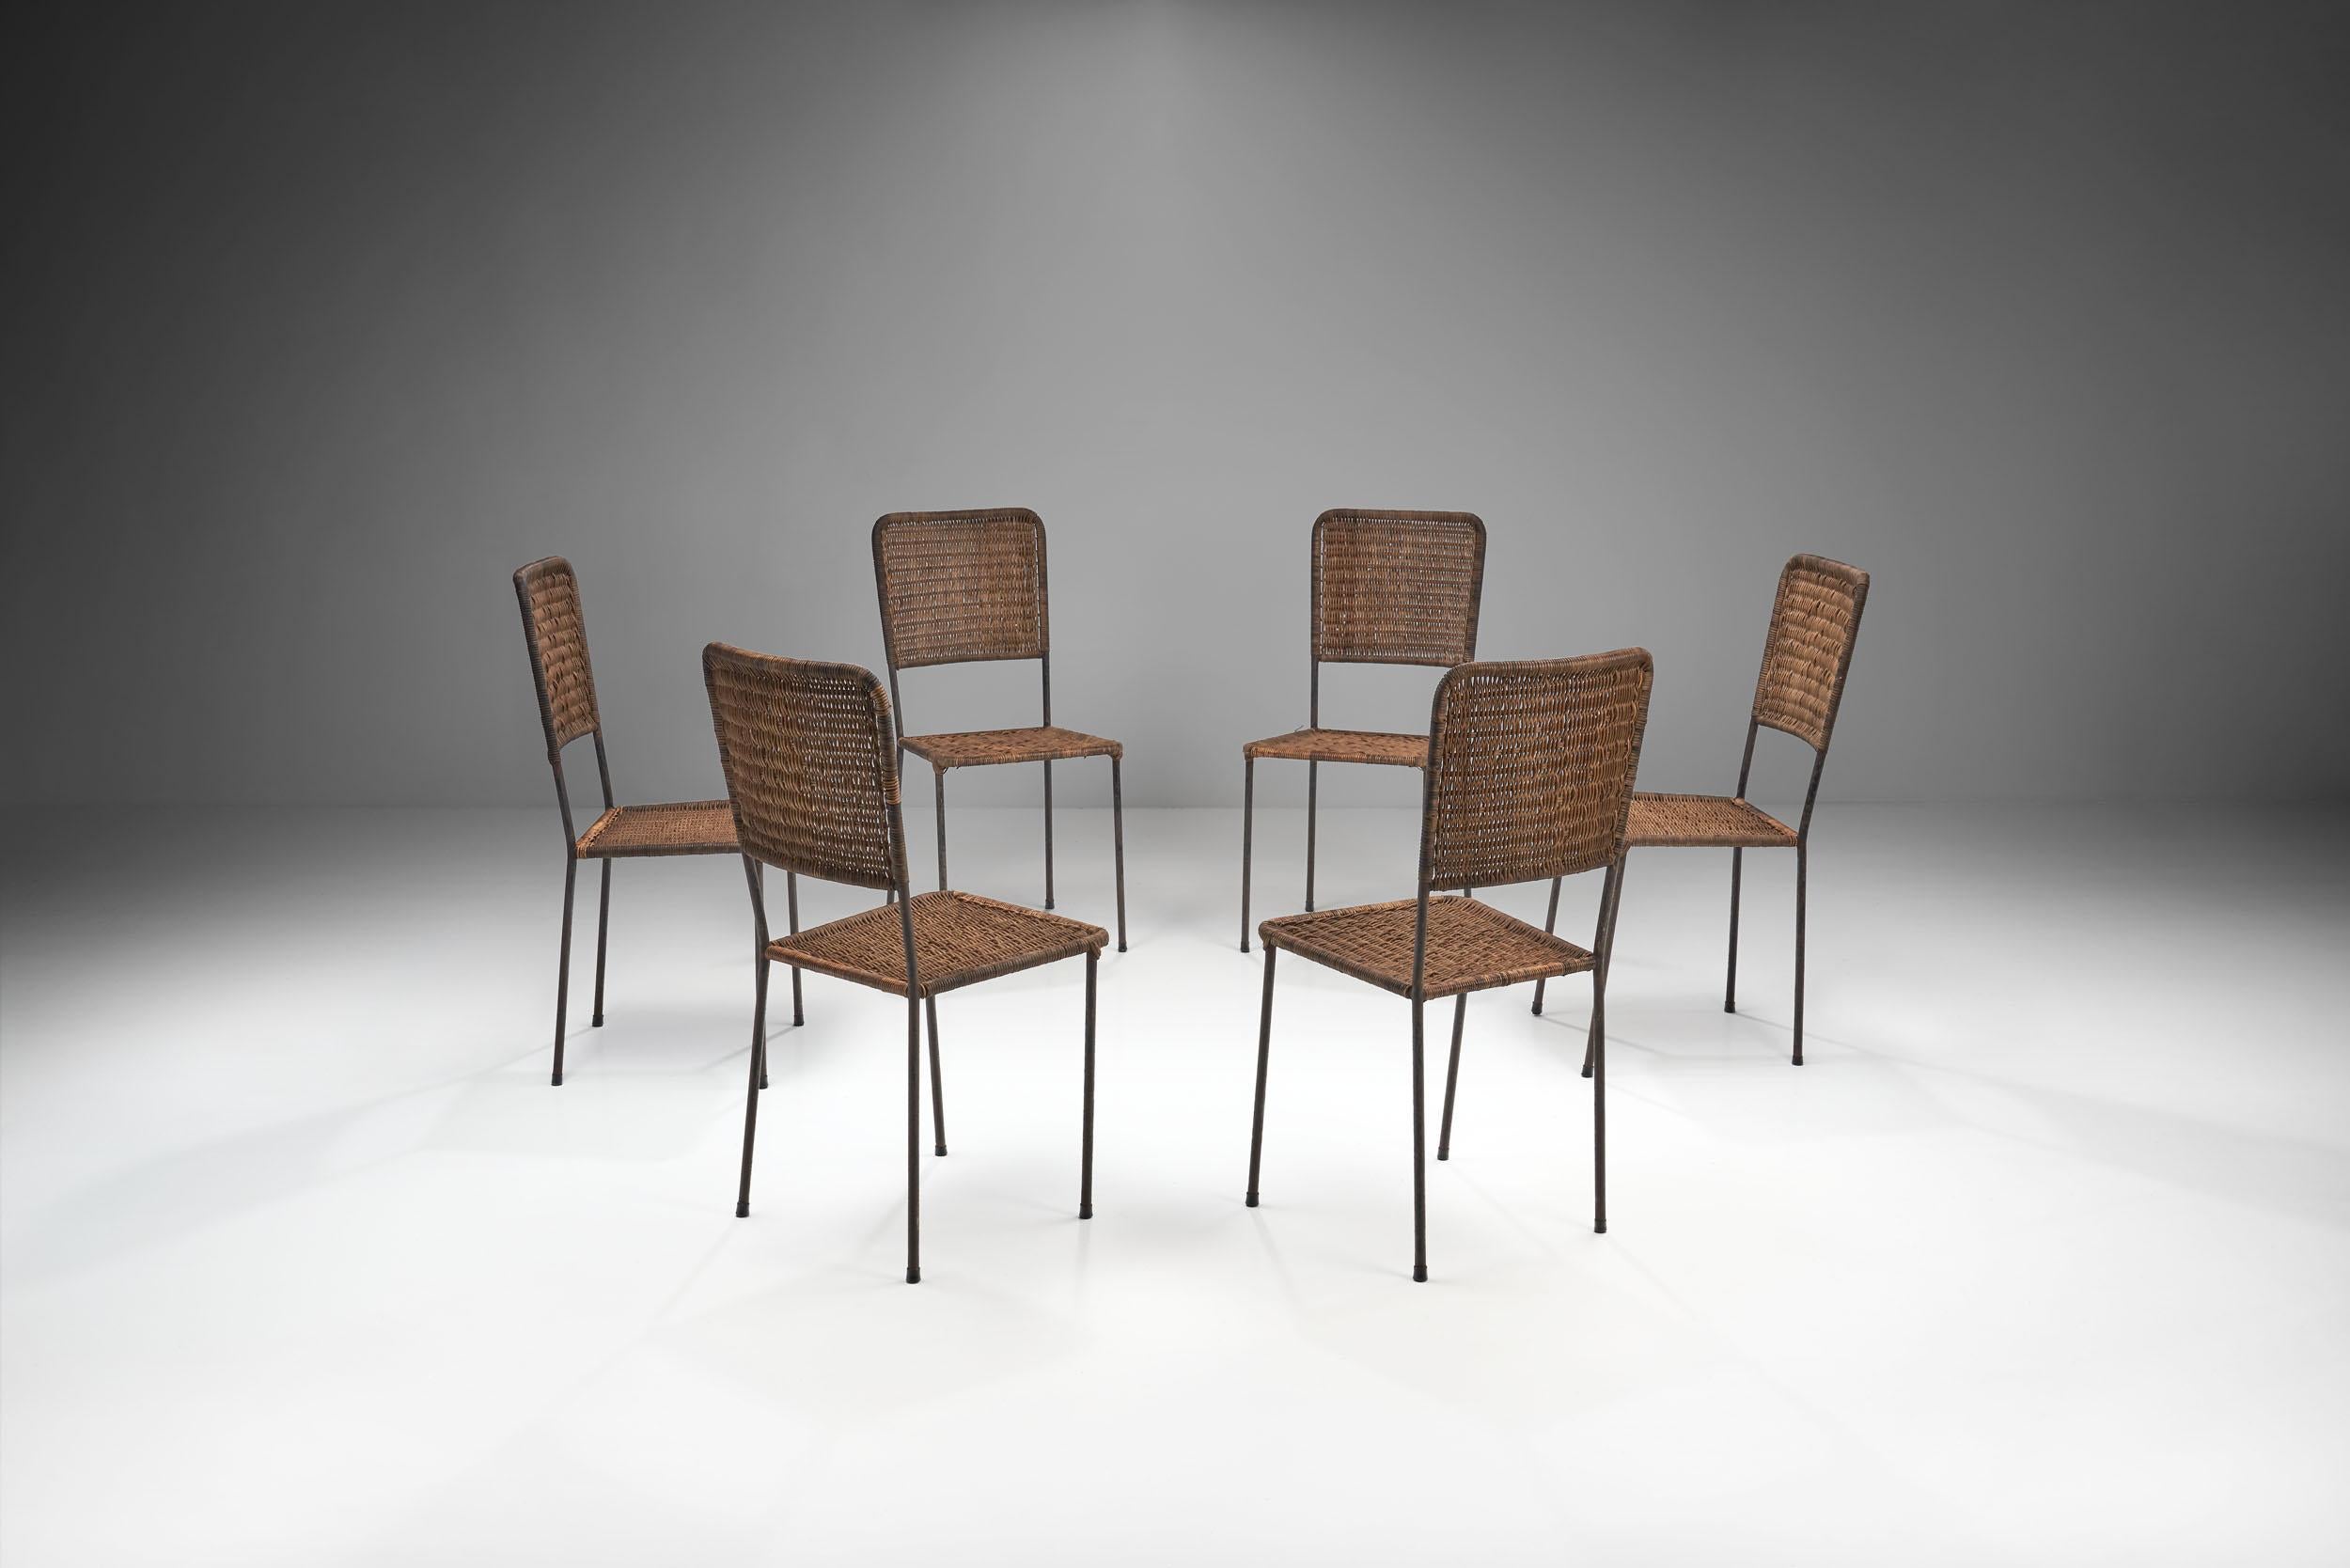 6 Iron and Rattan Chairs, Brazil, 1960s In Good Condition For Sale In Utrecht, NL